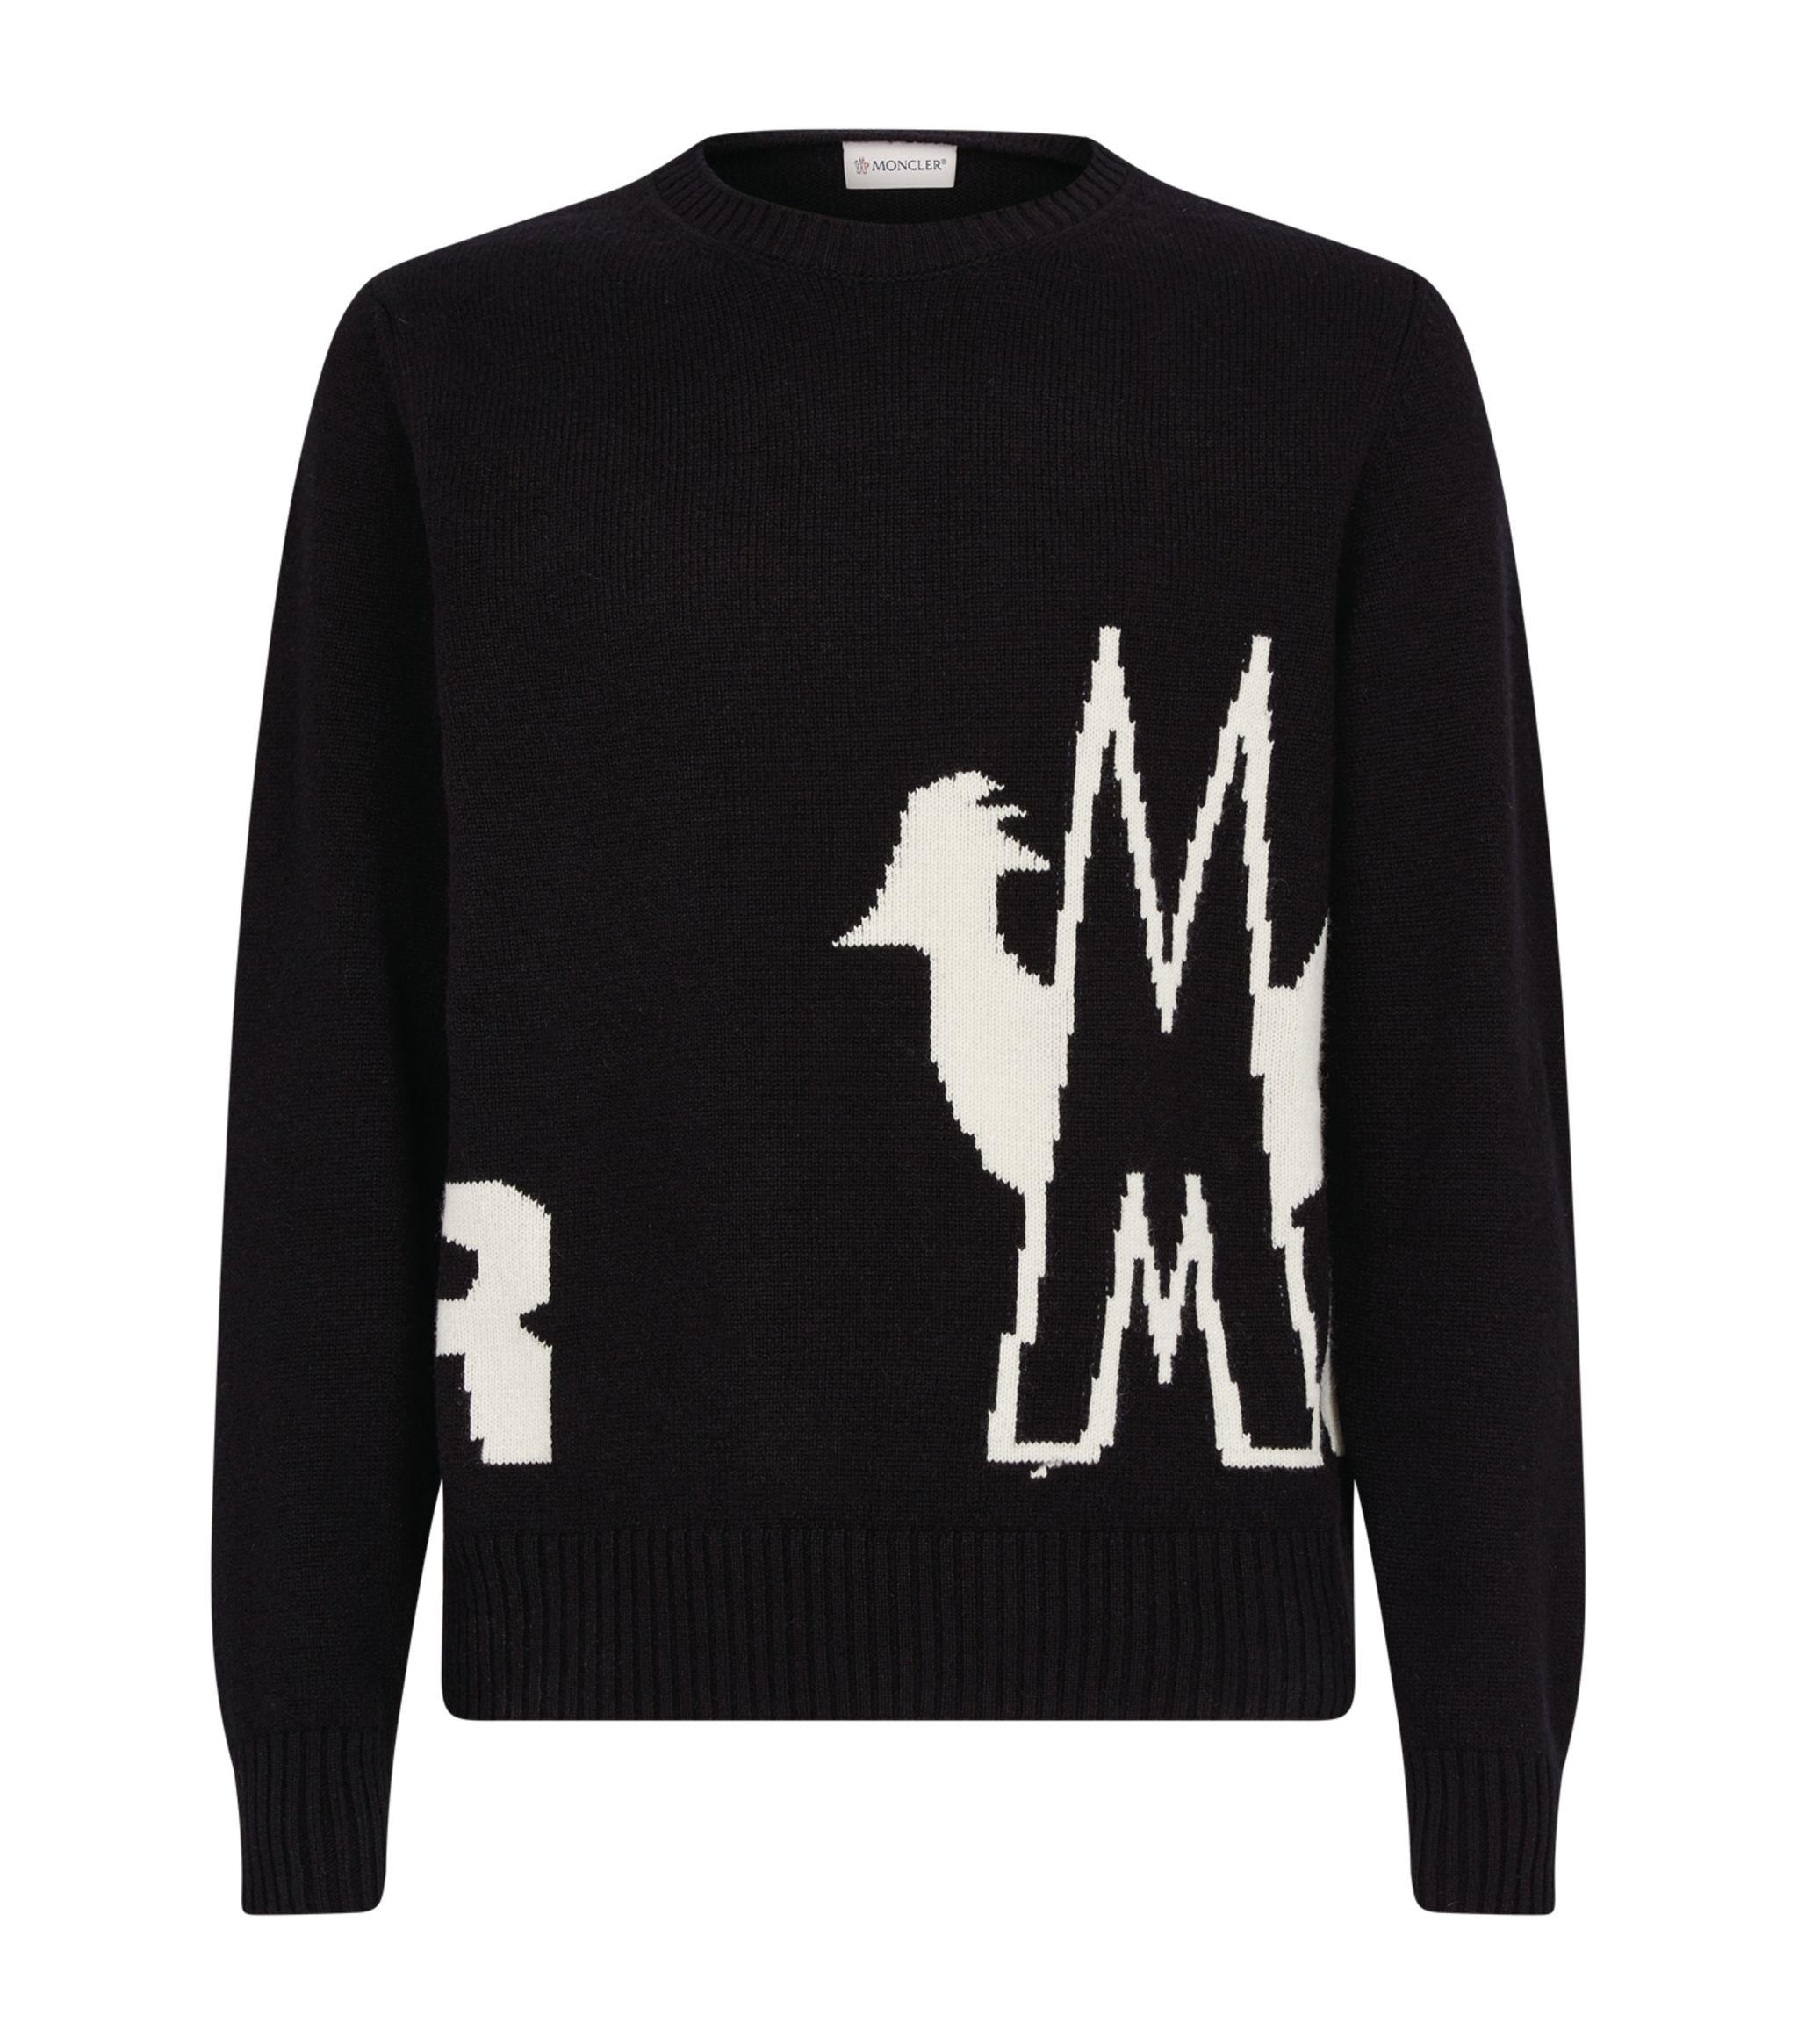 Moncler Wool Rooster Intarsia Logo Sweater in Black for Men - Save 47% ...